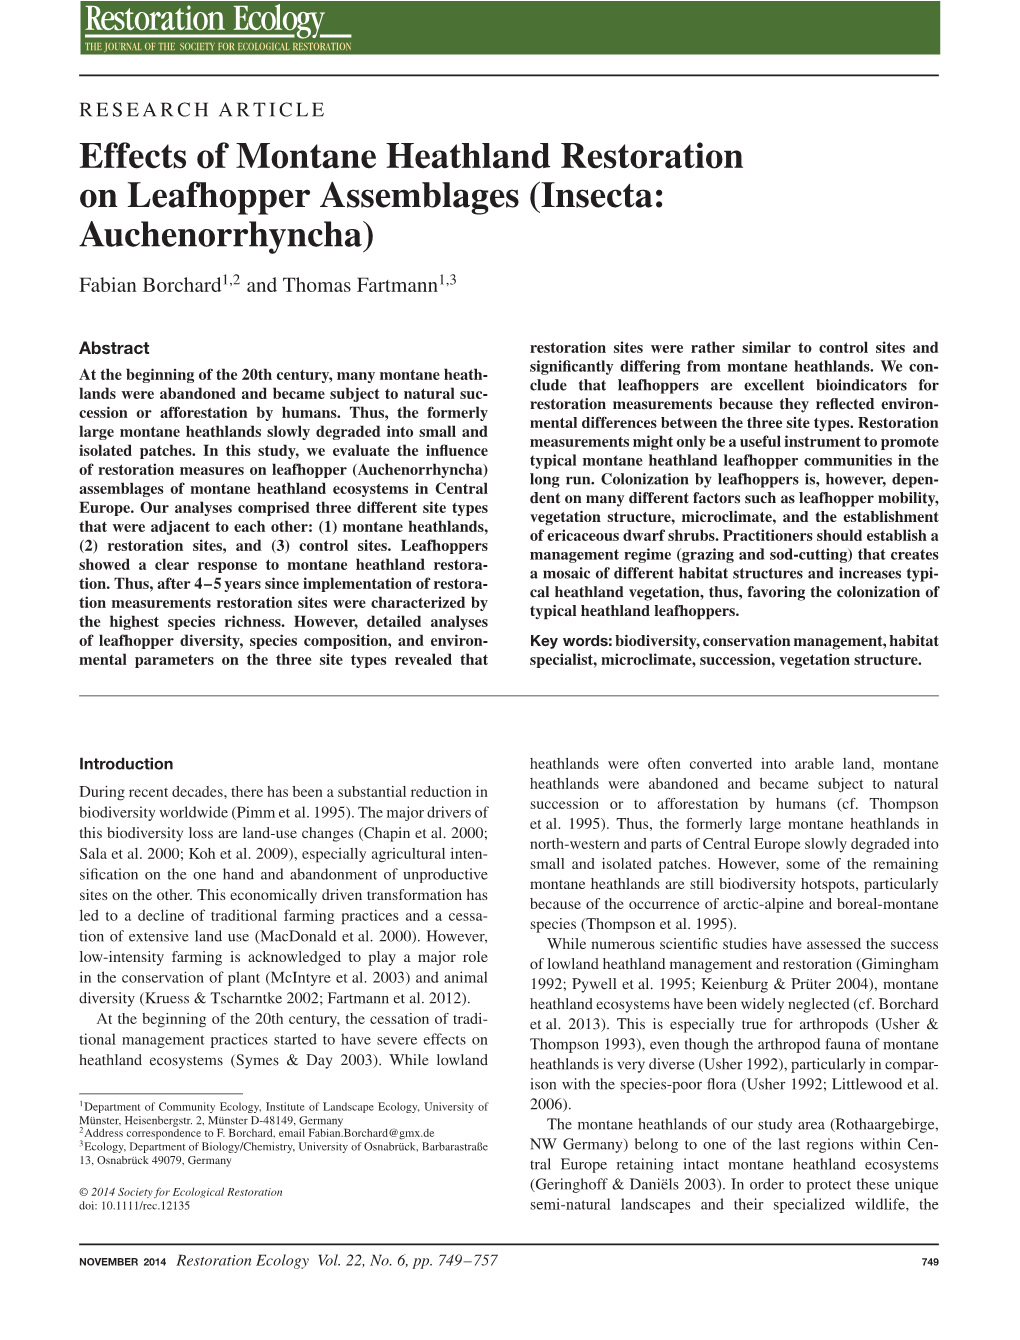 Effects of Montane Heathland Restoration on Leafhopper Assemblages (Insecta: Auchenorrhyncha) Fabian Borchard1,2 and Thomas Fartmann1,3